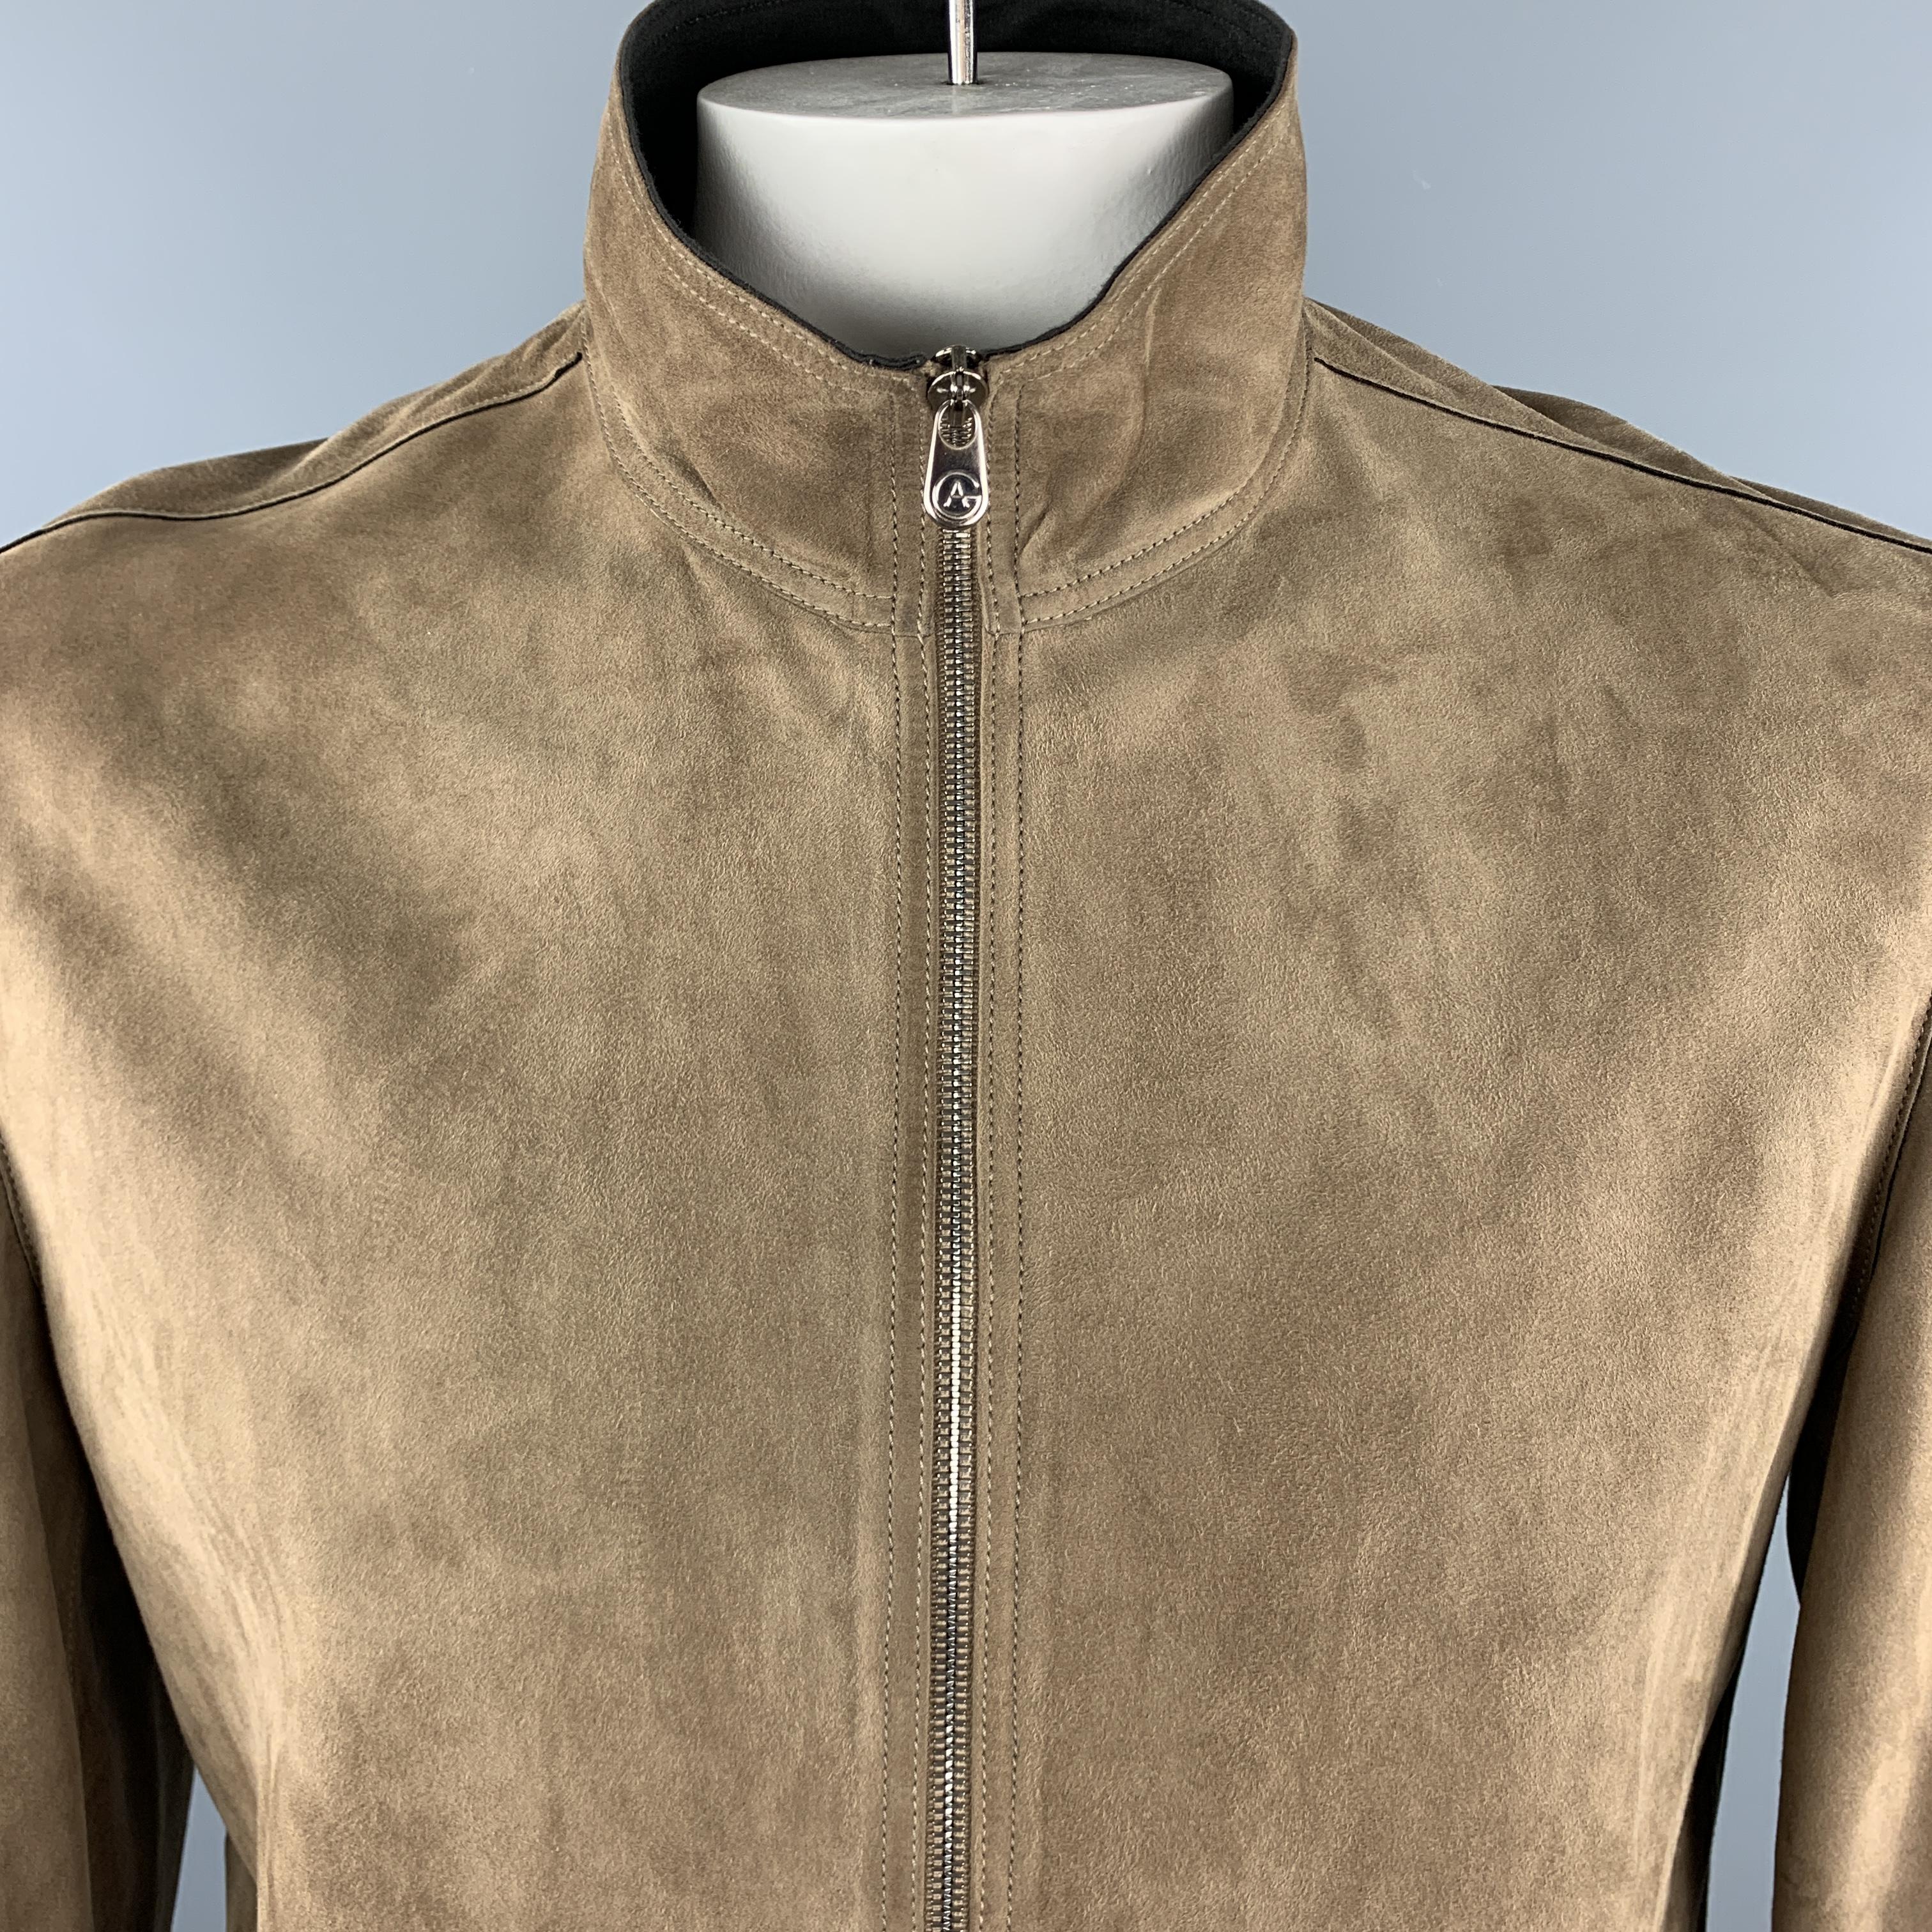 ARMANI COLLEZIONI Motorcycle Jacket comes in a brown tone in a solid suede material, with a high collar, zip pockets, unbuttoned cuffs, unlined, zip up. Made in Italy. 

Excellent Pre-Owned Condition.
Marked: IT 42

Measurements:

Shoulder: 18.5 in.